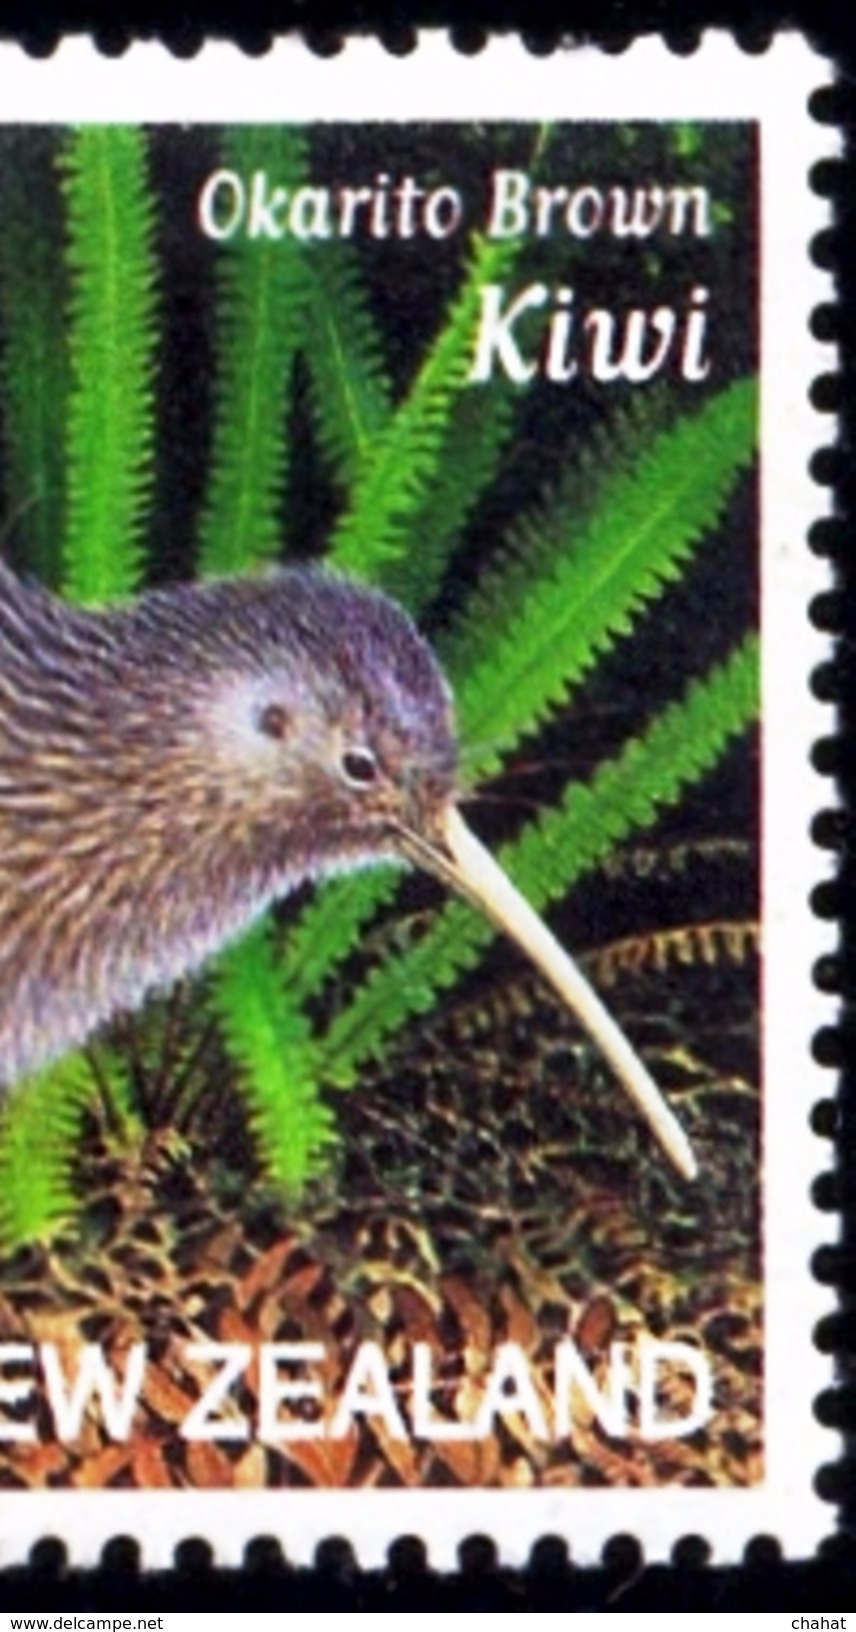 FLIGHTLESS BIRDS-KIWI-COLOR SEPARATION-ERROR-TRIALS-SET OF 5-JOINT ISSUE WITH FRANCE-NEW ZEALAND-2000-SG-2375-MNH-PA-06 - Kiwi's